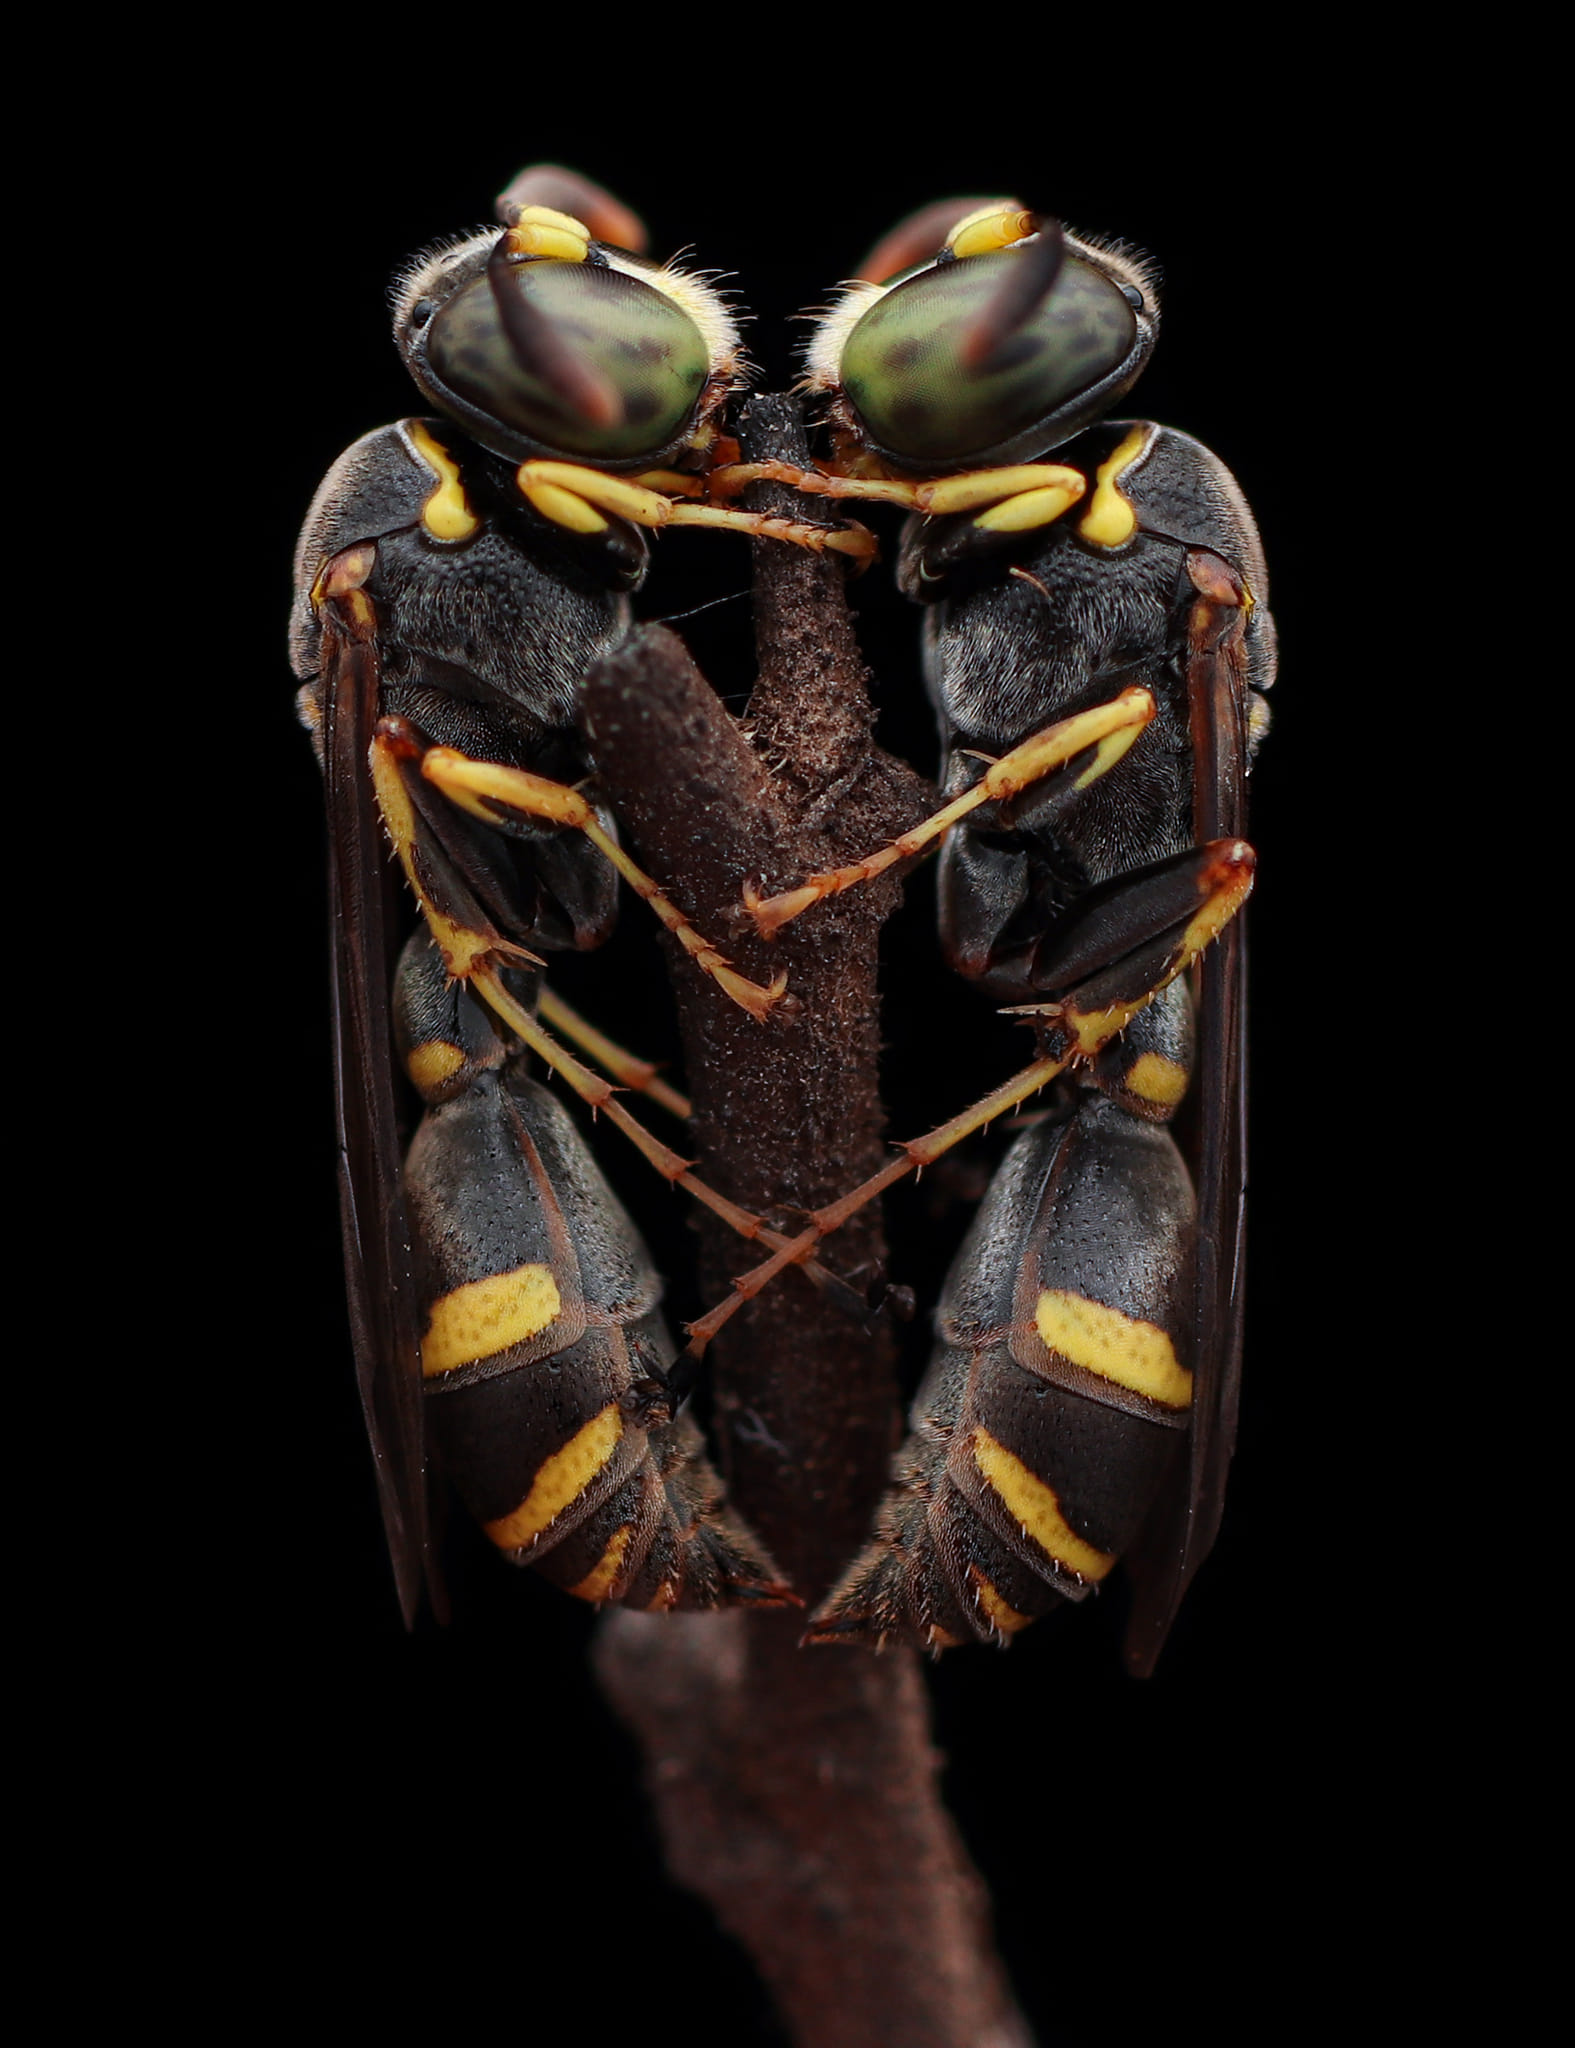 General 1575x2048 wasps nature macro branch animals Dix Balino portrait display insect black background simple background minimalism